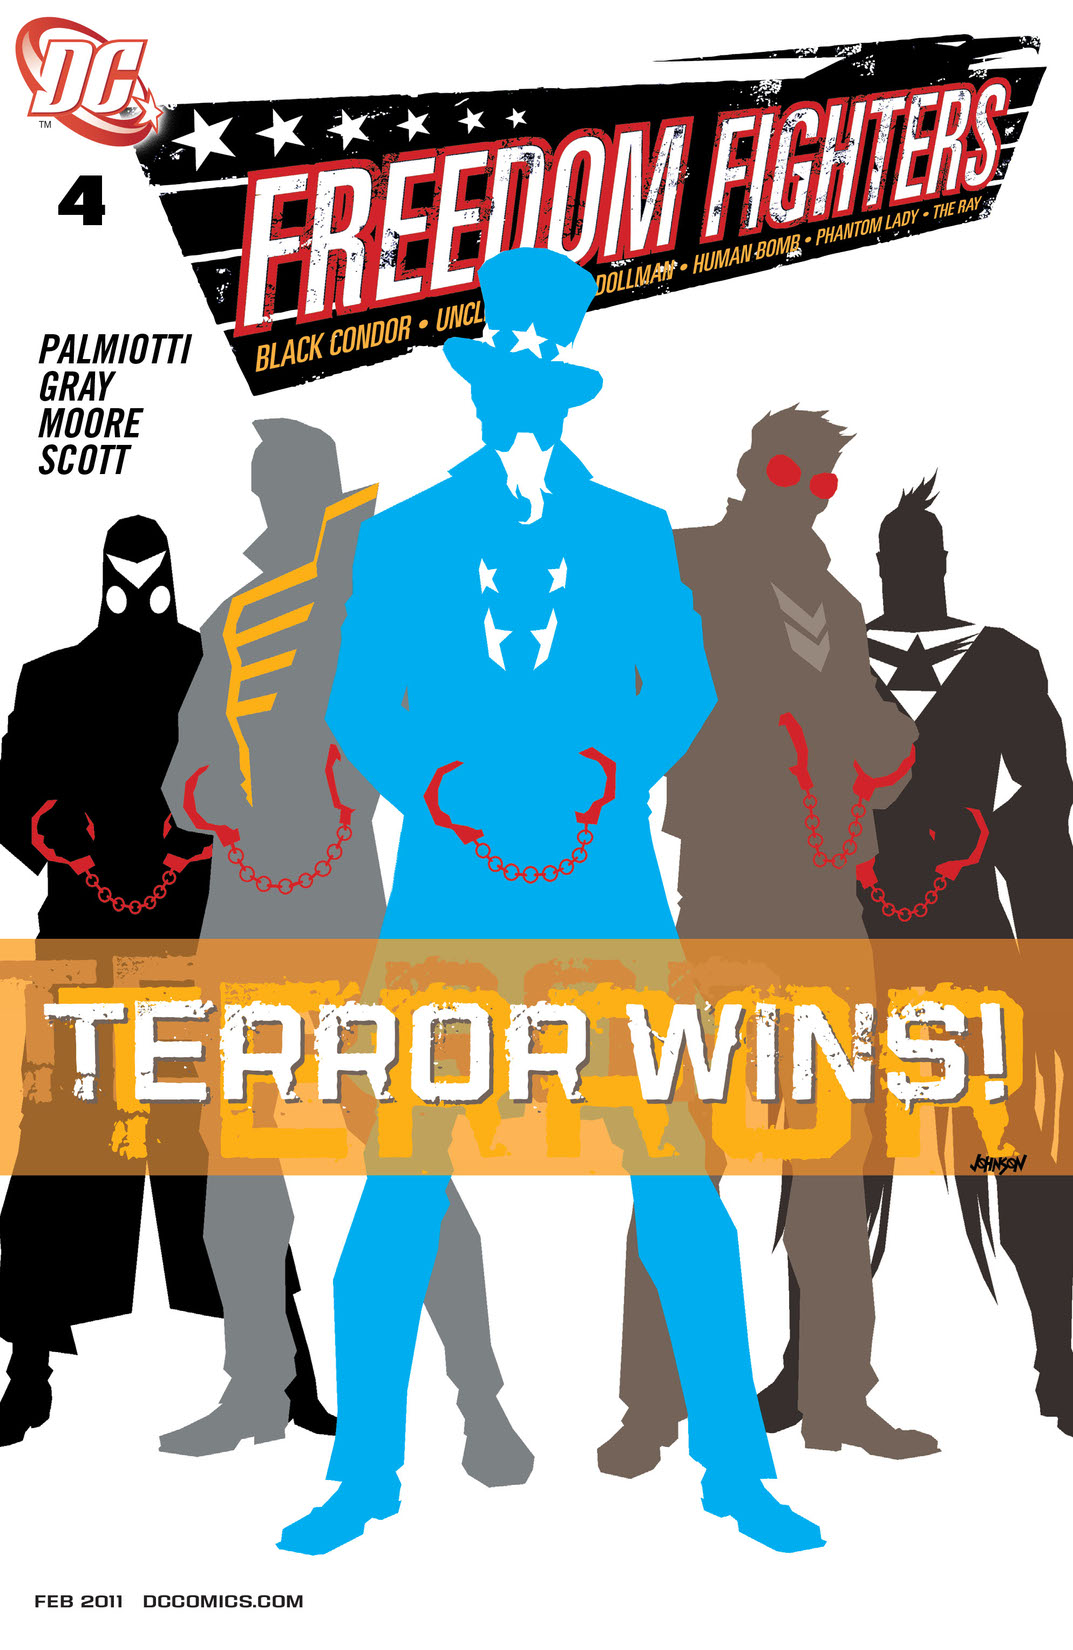 Freedom Fighters (2010-) #4 preview images